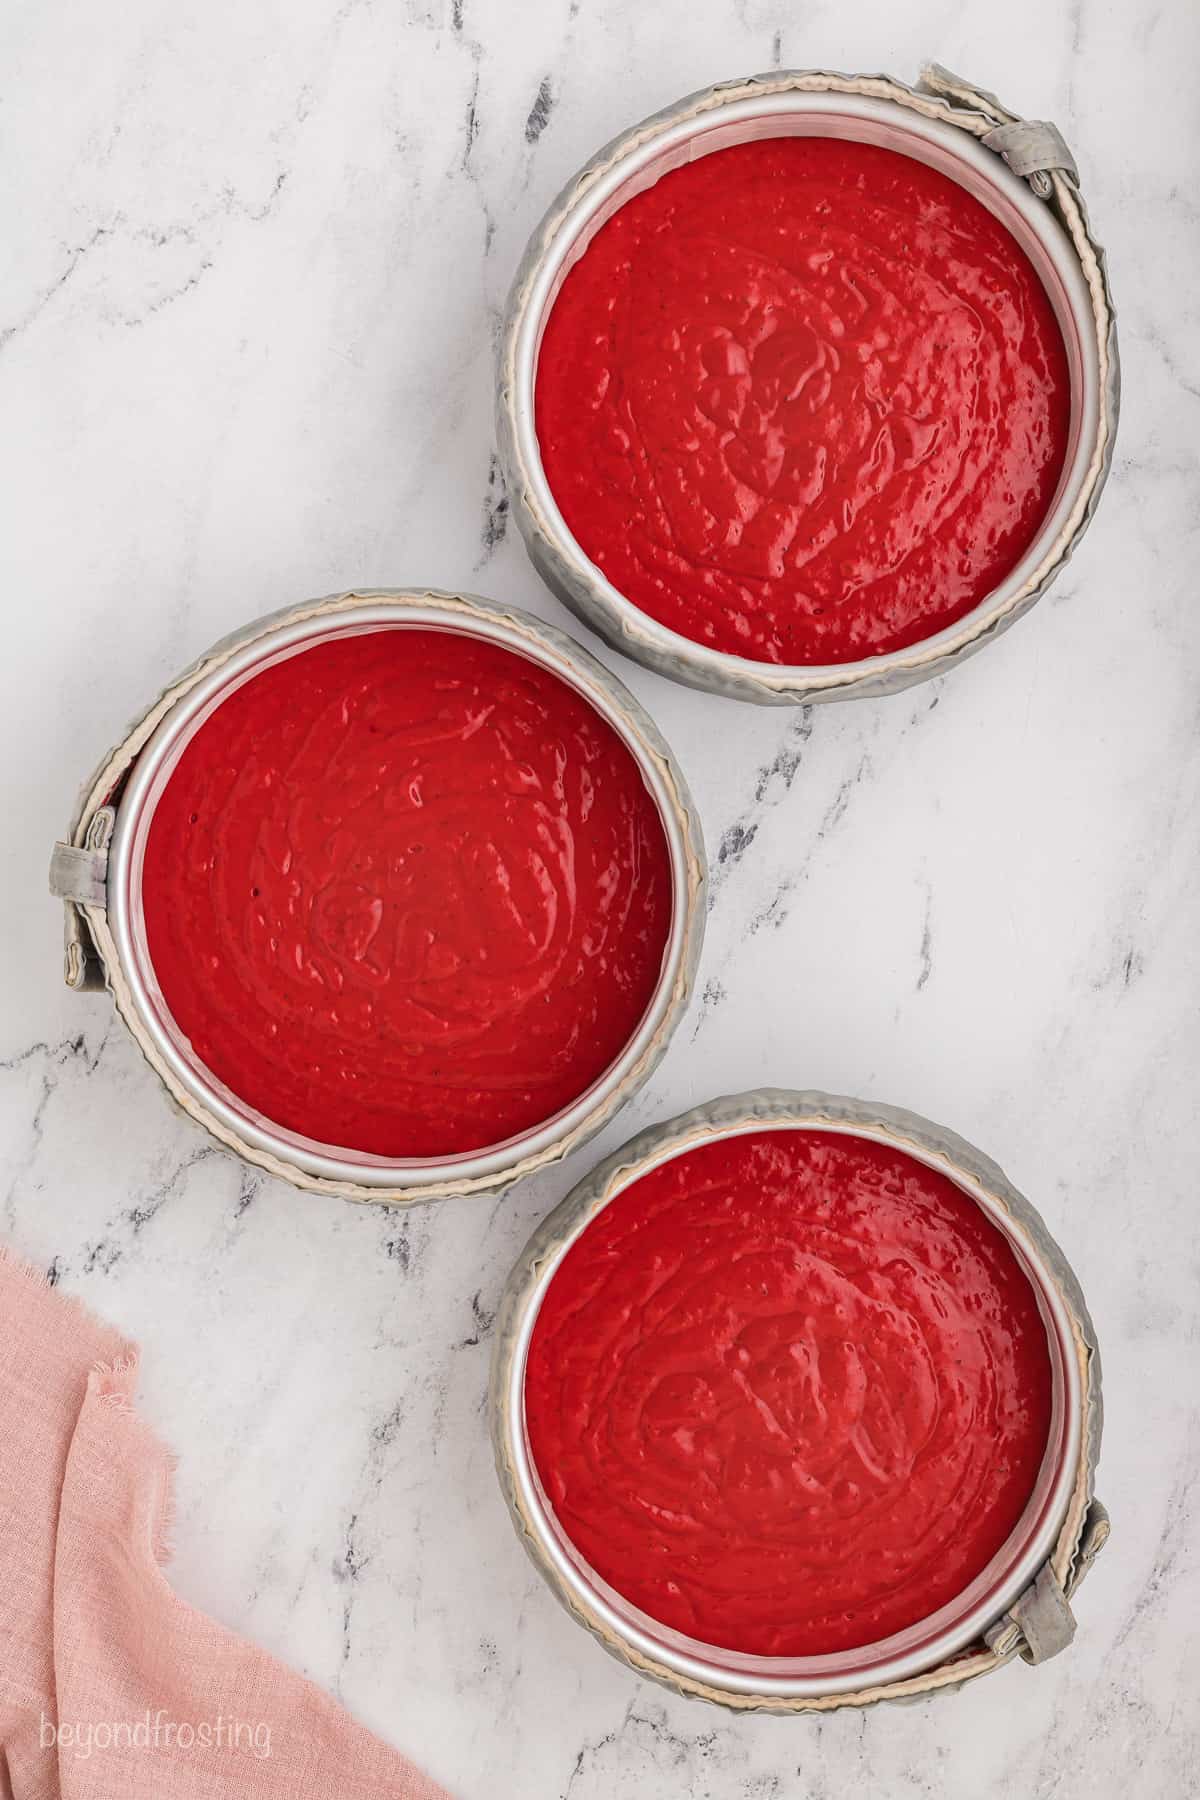 Overhead view of three round cake pans filled with red velvet cake batter.